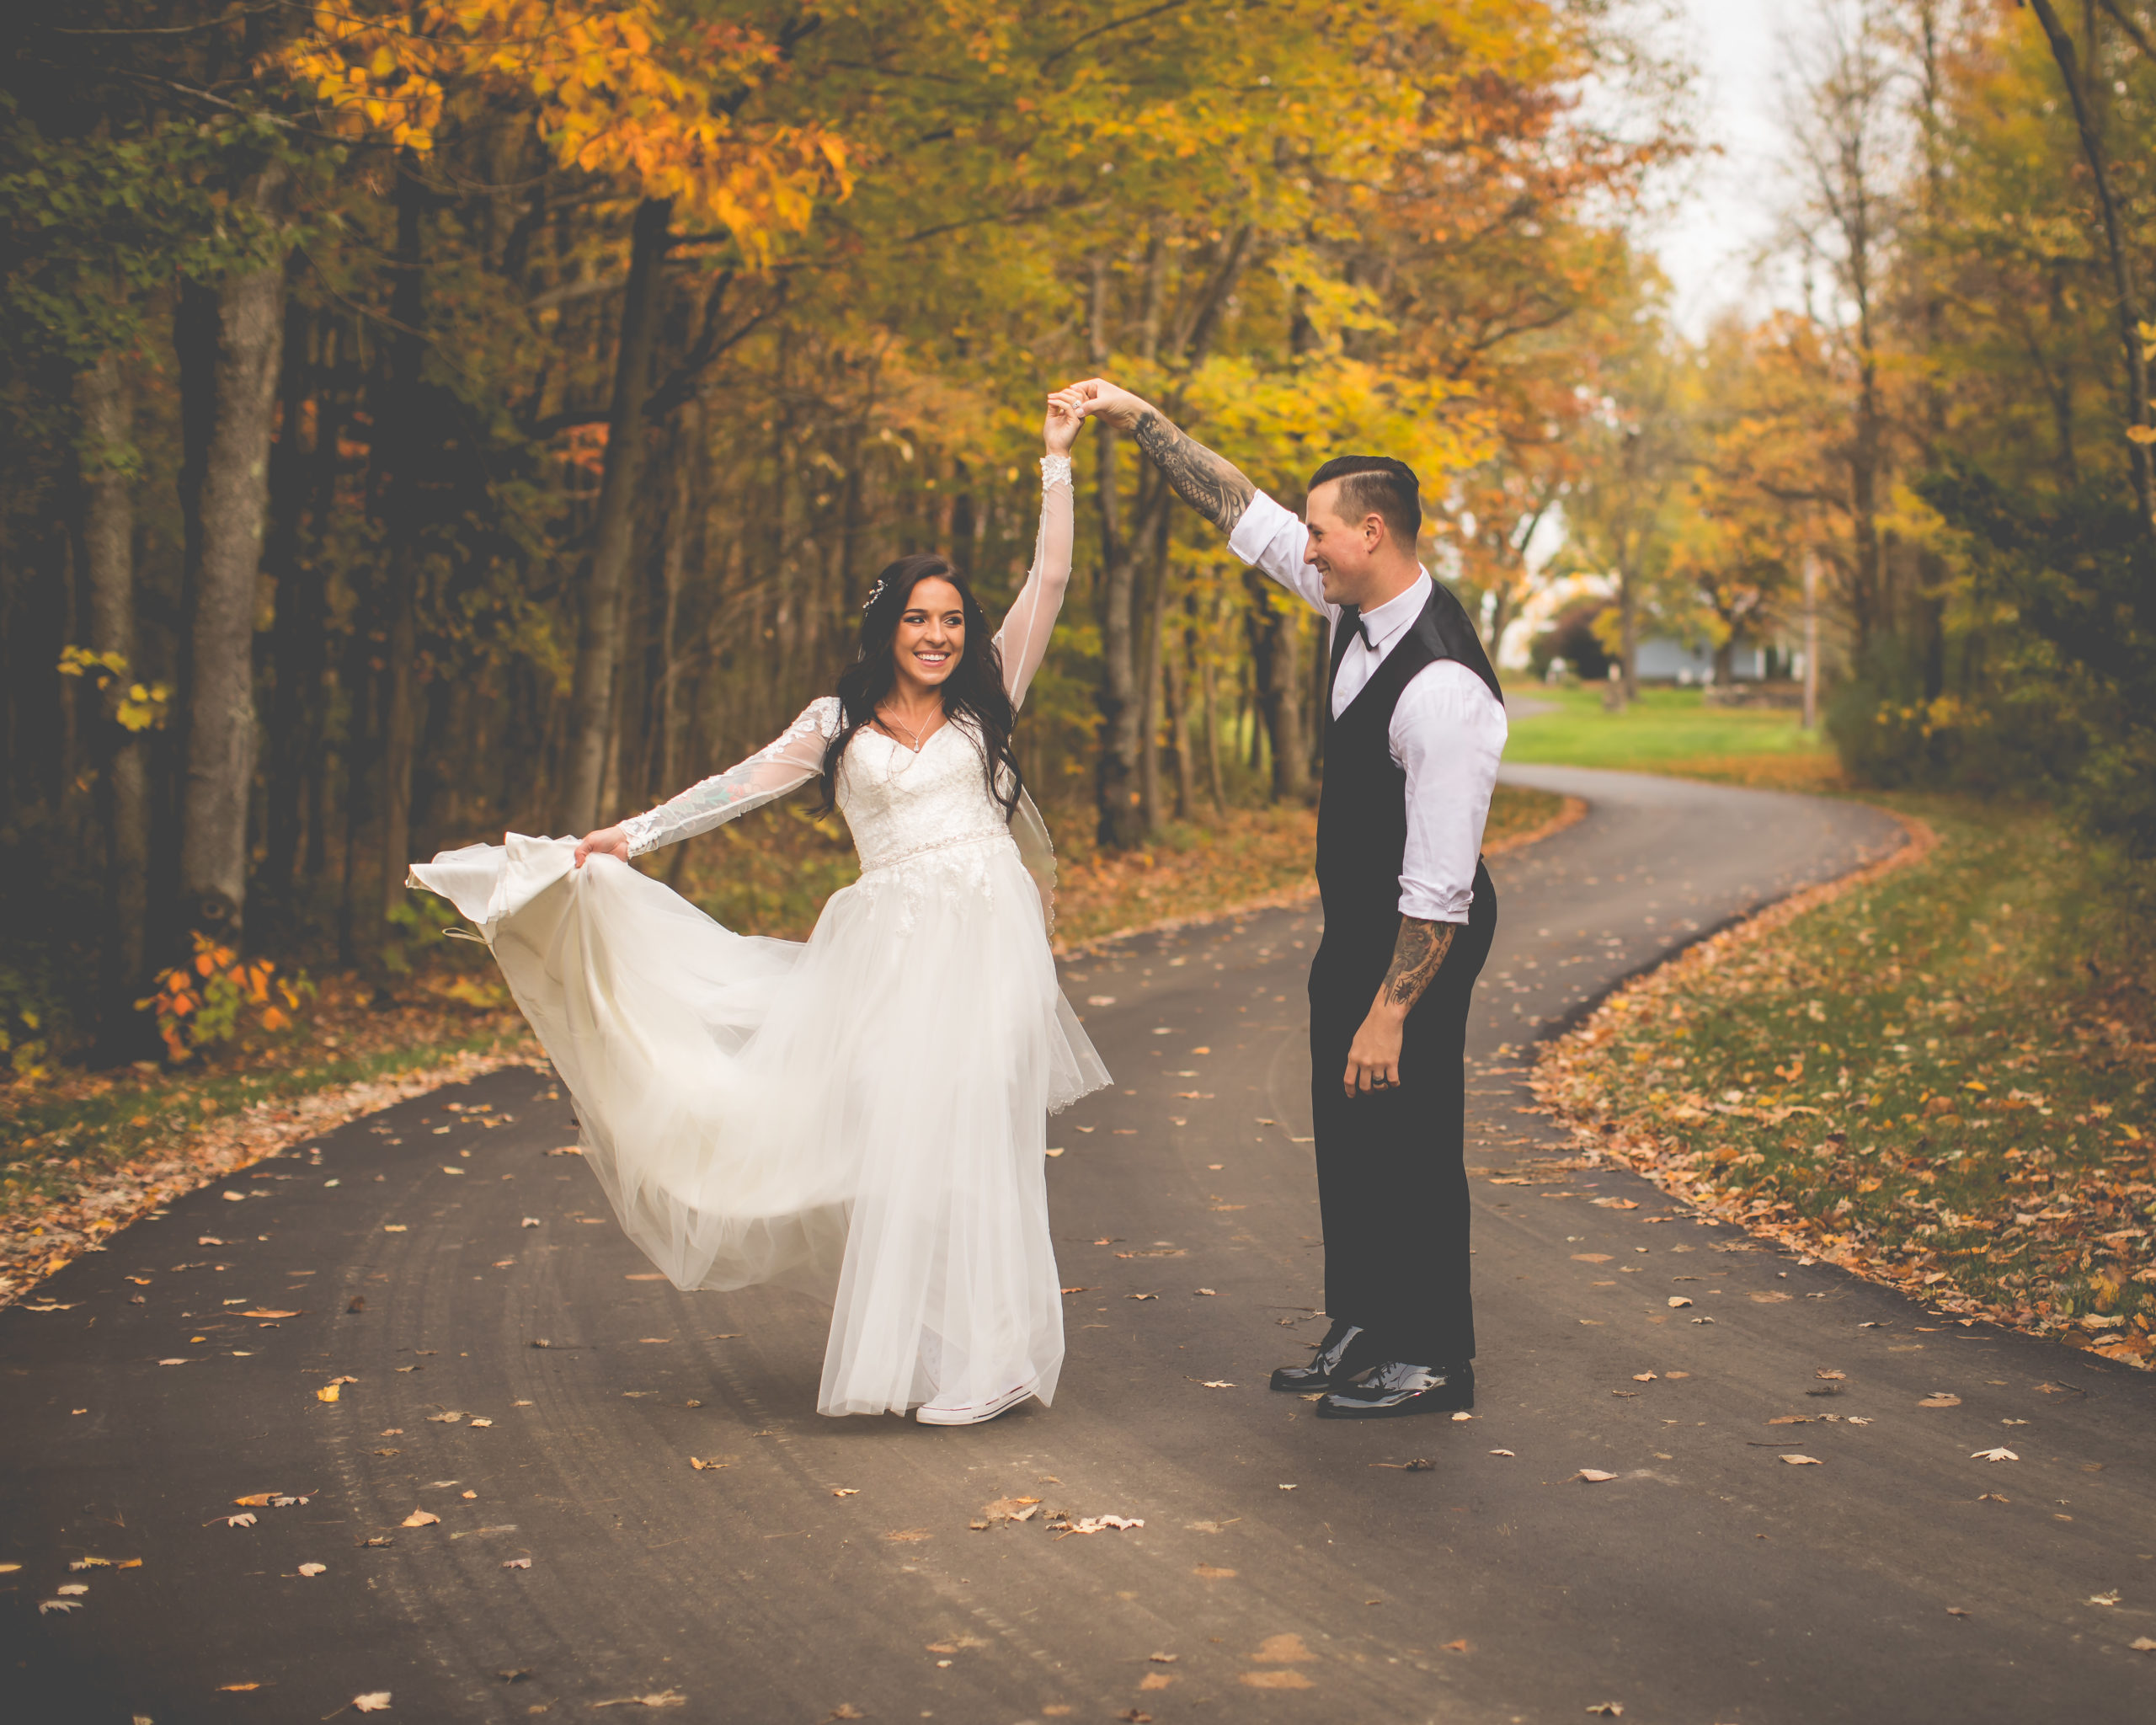 Bride and groom posing in the winding lane during the fall